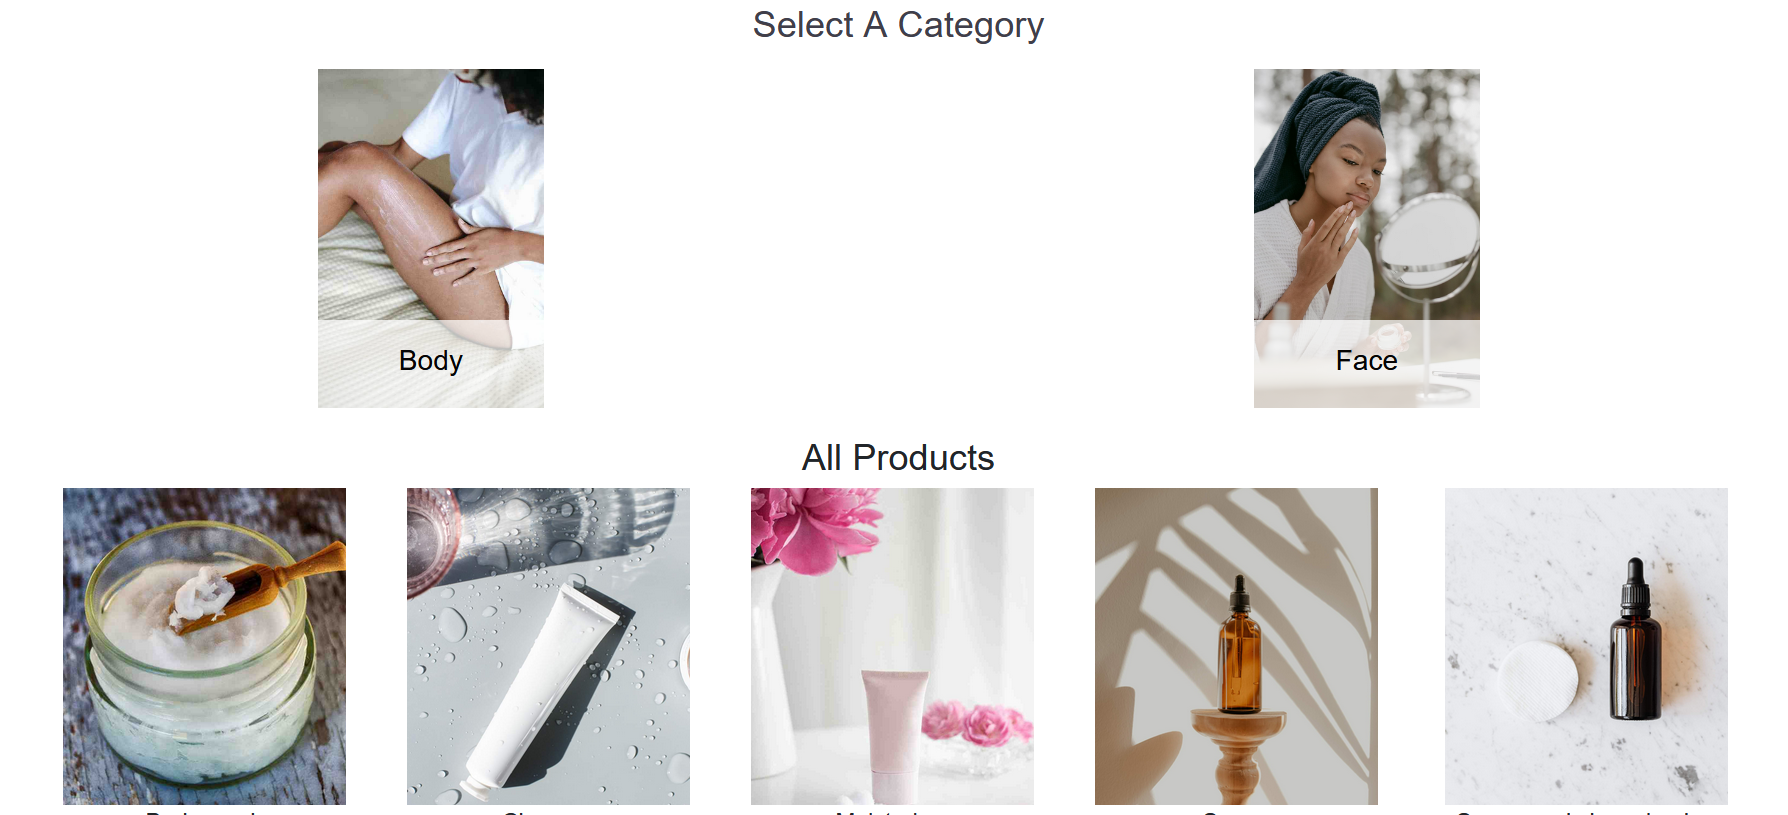 selecting a category for products in online store